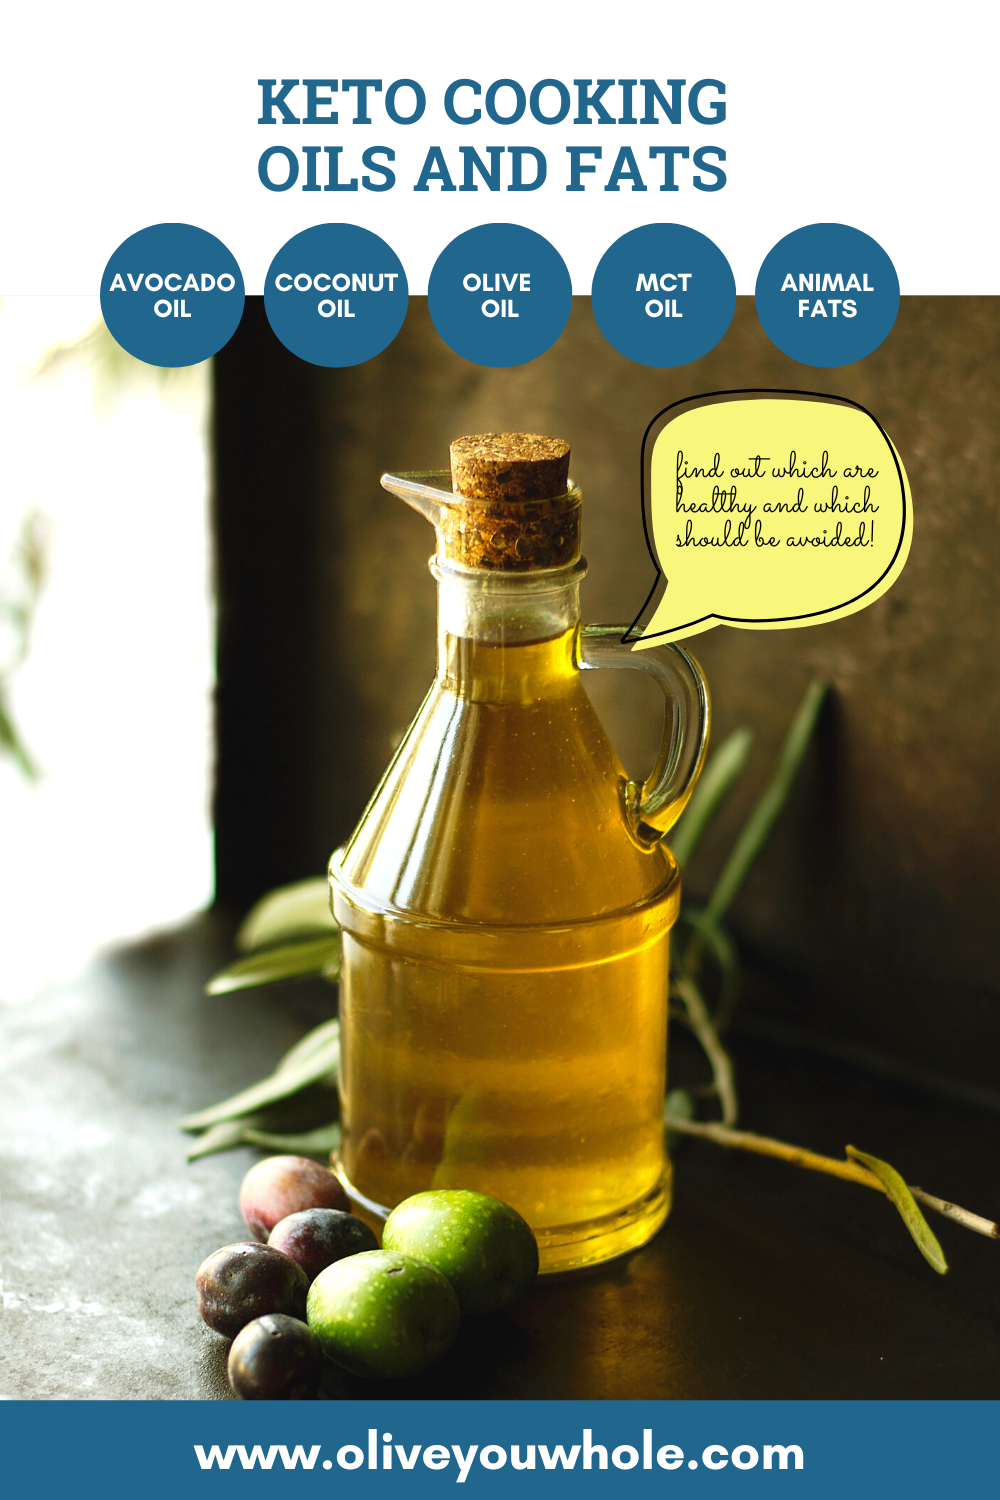 Keto Cooking Oils and Fats